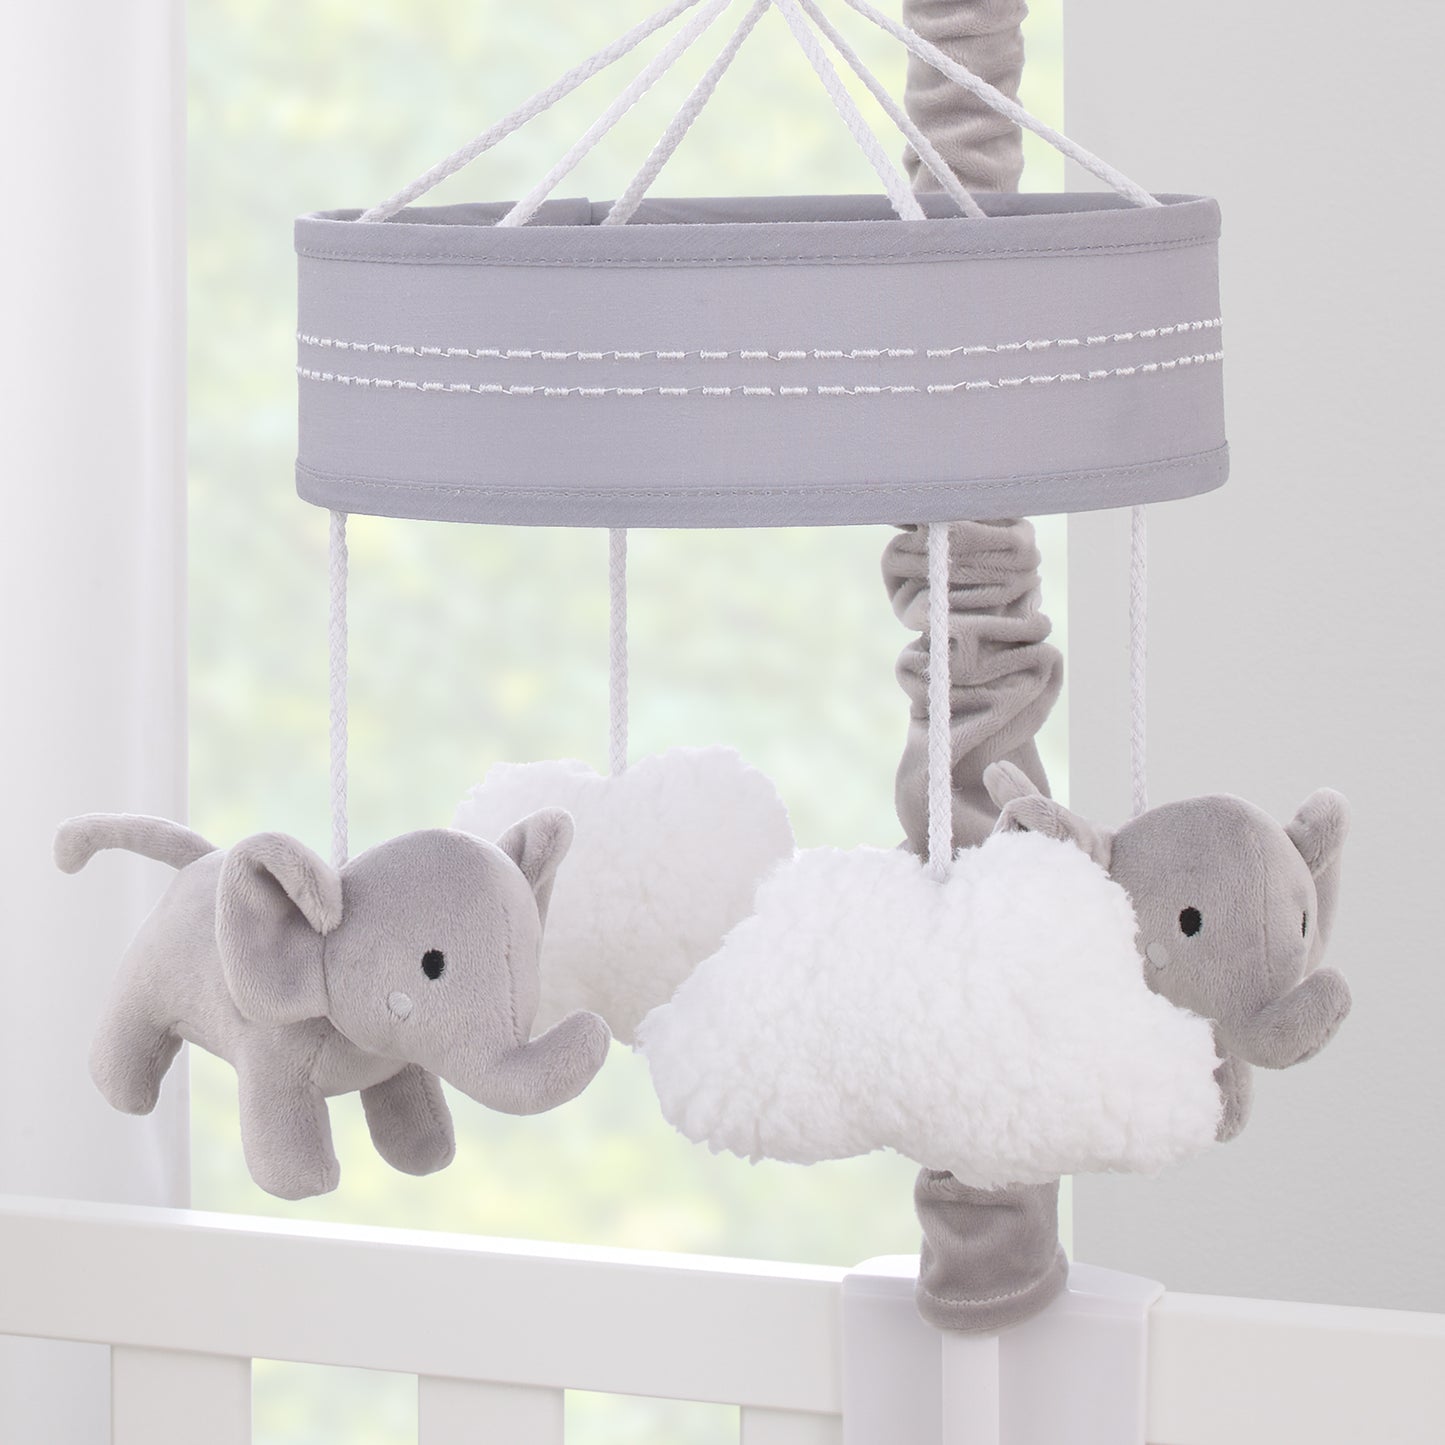 NoJo Plush Elephant Gray and White Puffy Clouds Musical Mobile